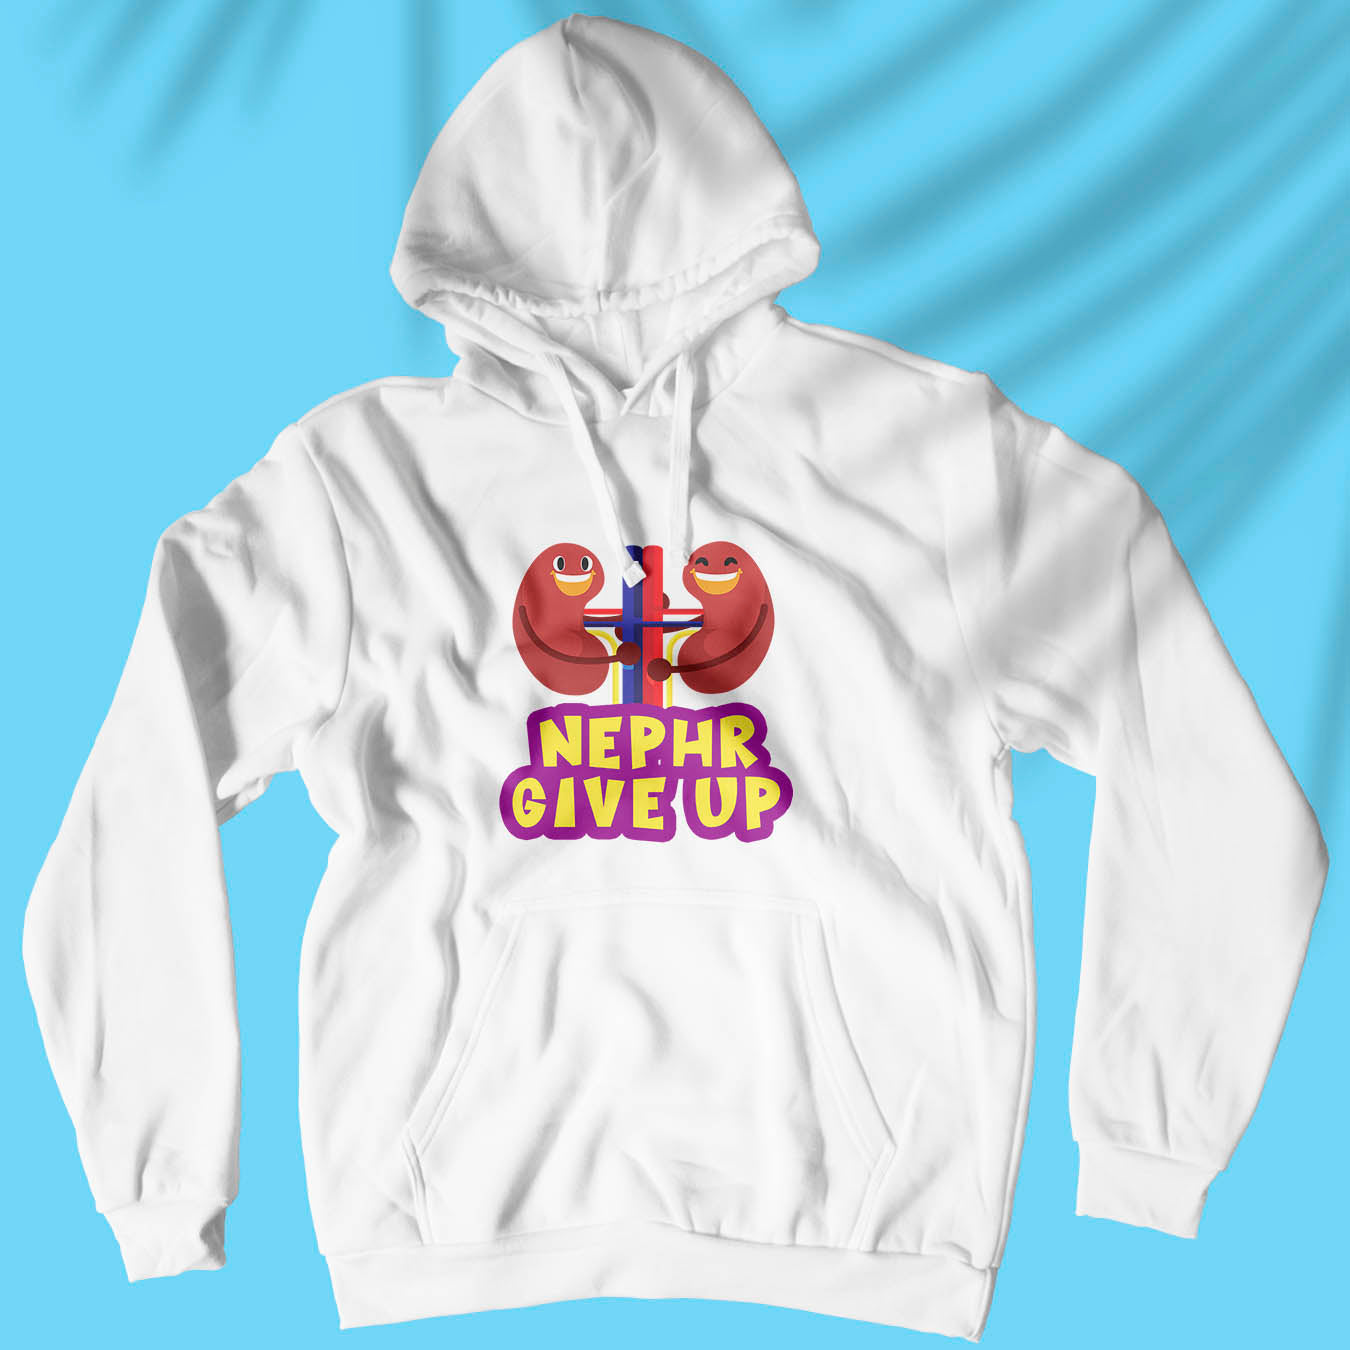 Nephr Give Up - Unisex Hoodie